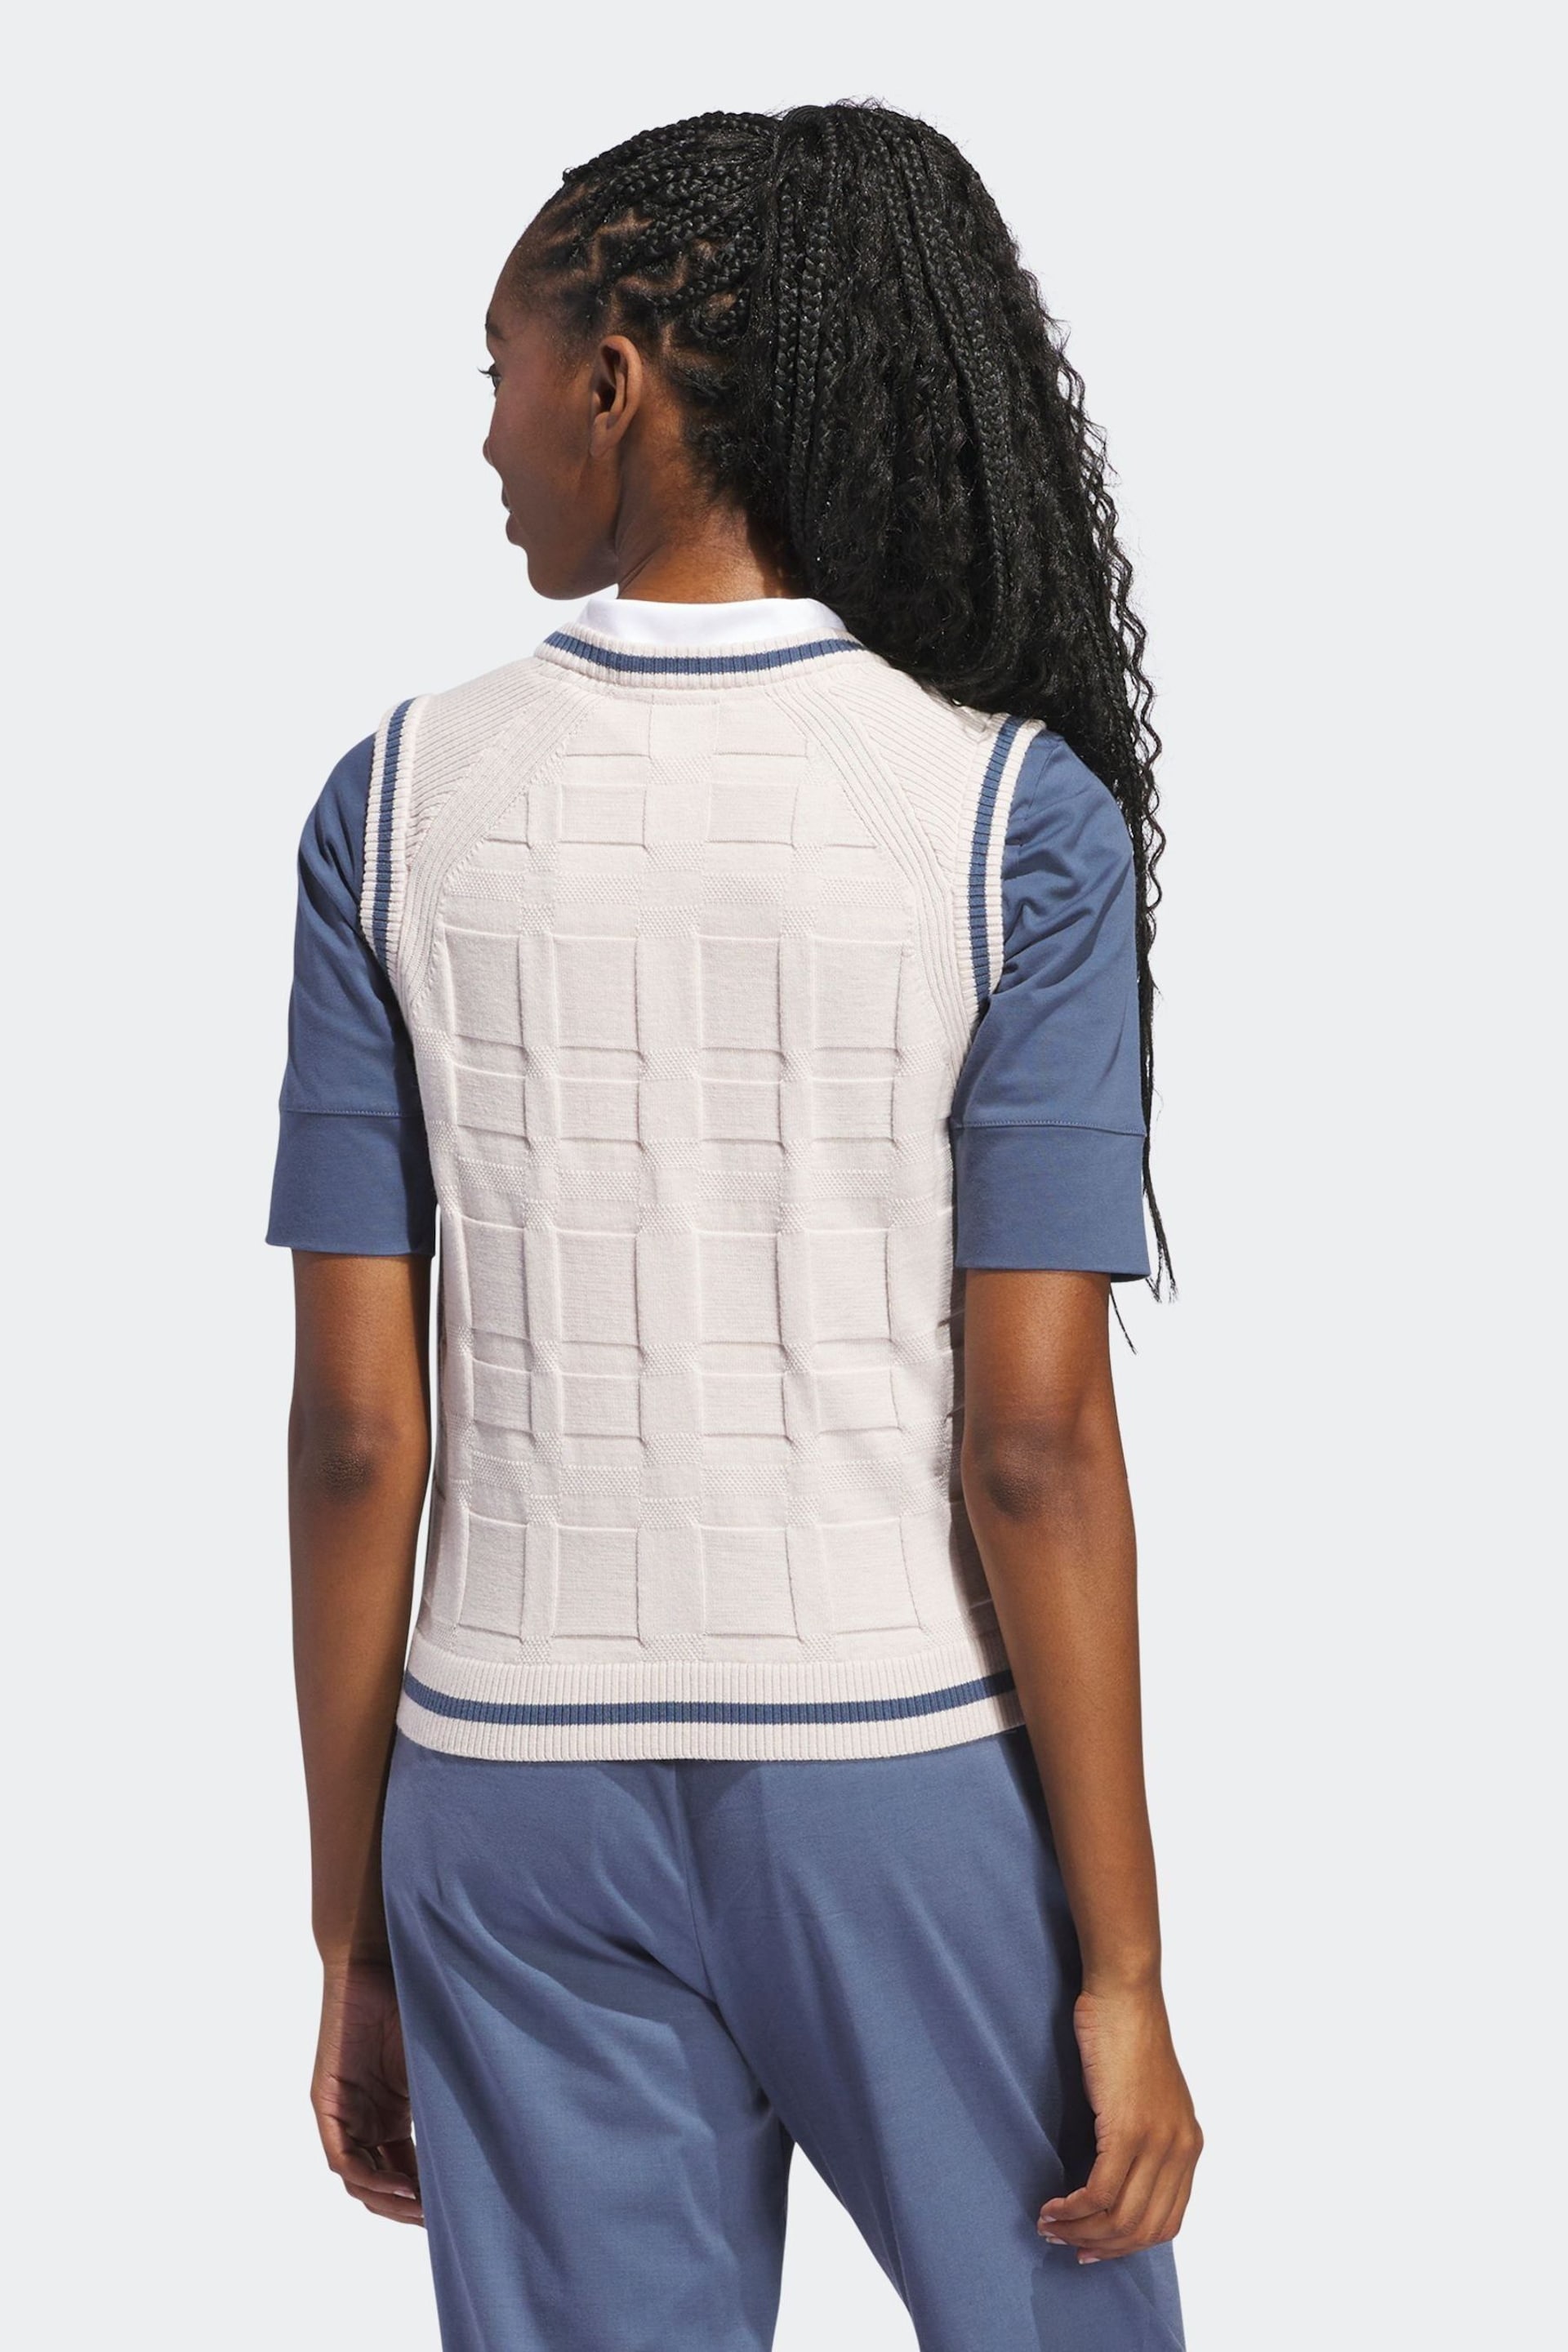 adidas Golf Womens Go-To White Sweater Vest - Image 4 of 7